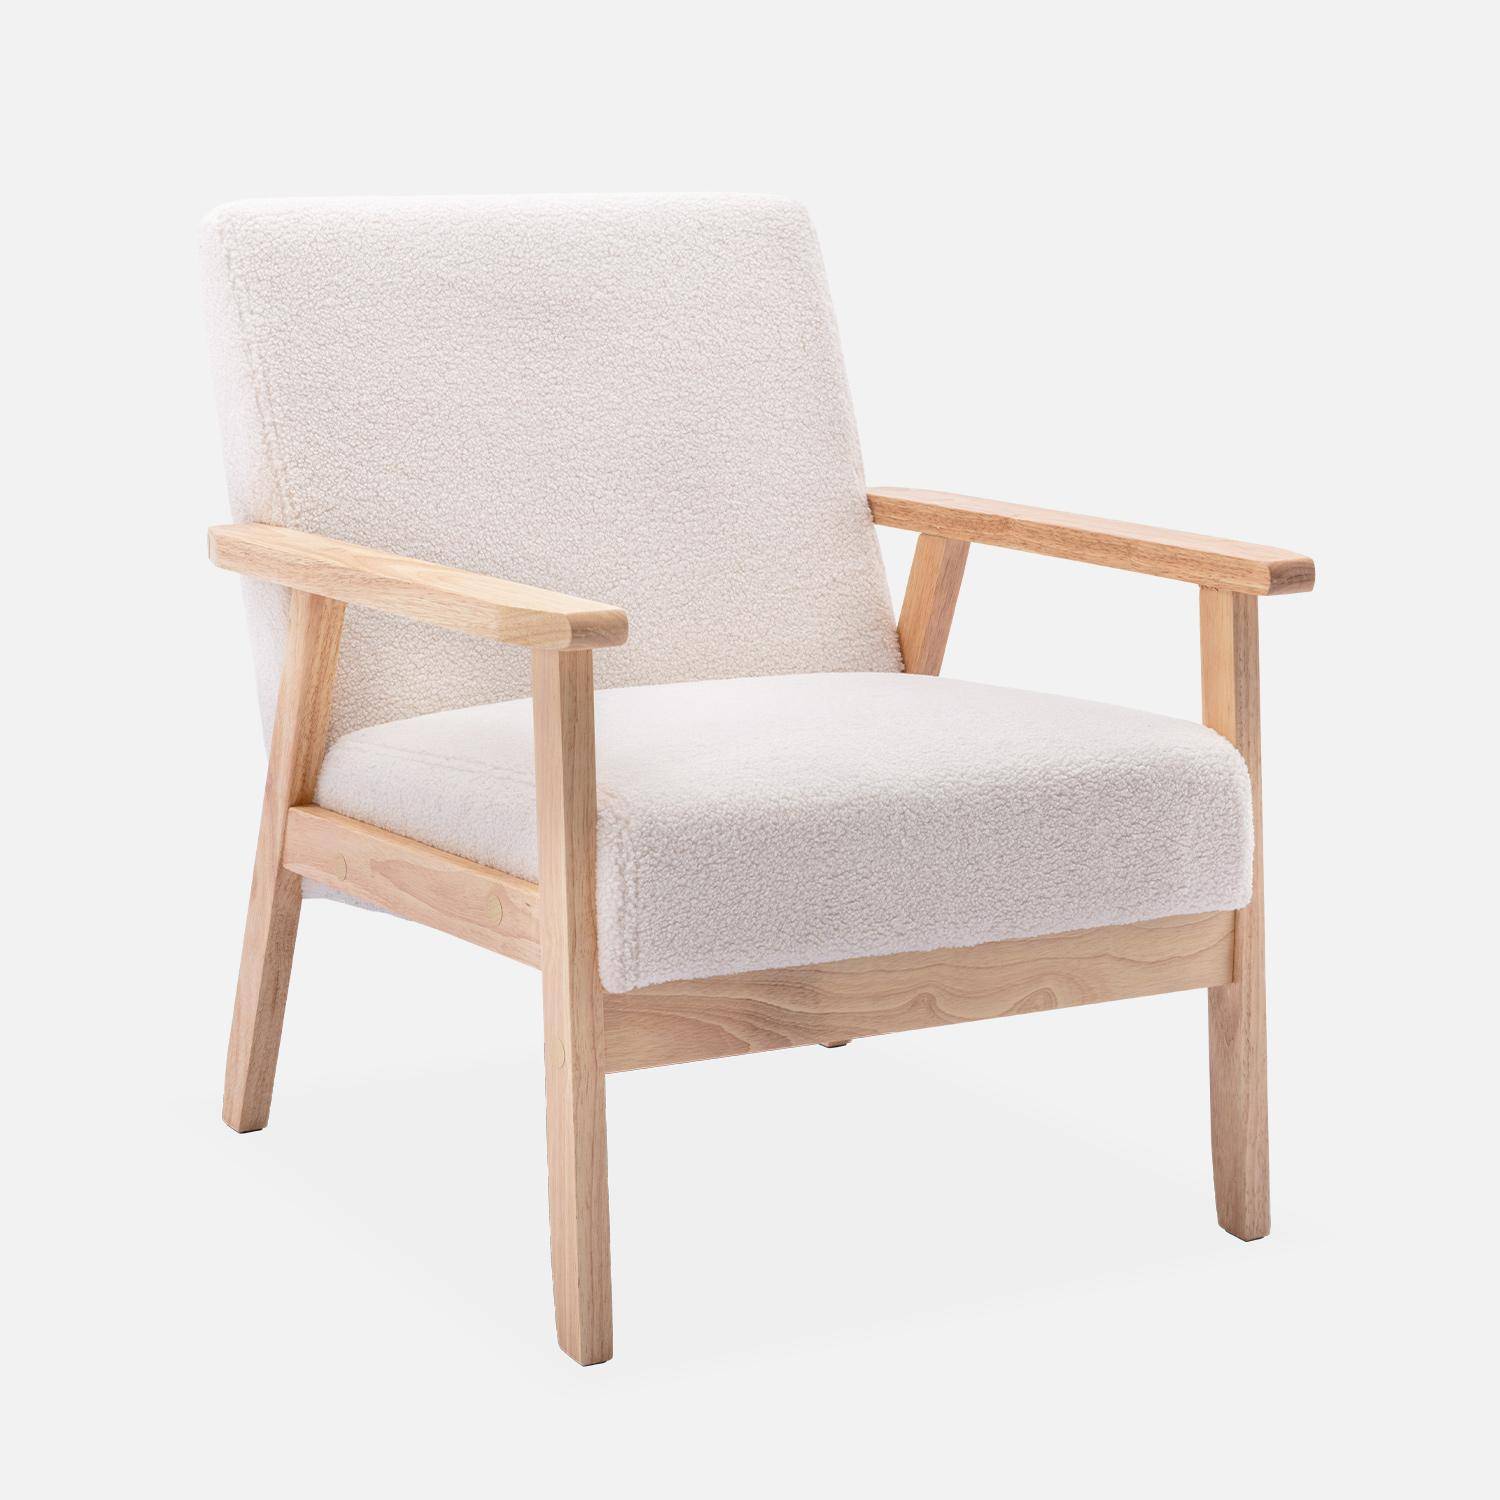 Scandi-style boucle armchair, wooden frame and boucle fabric, 64x69.5x73cm - Isak Boucle - White,sweeek,Photo3